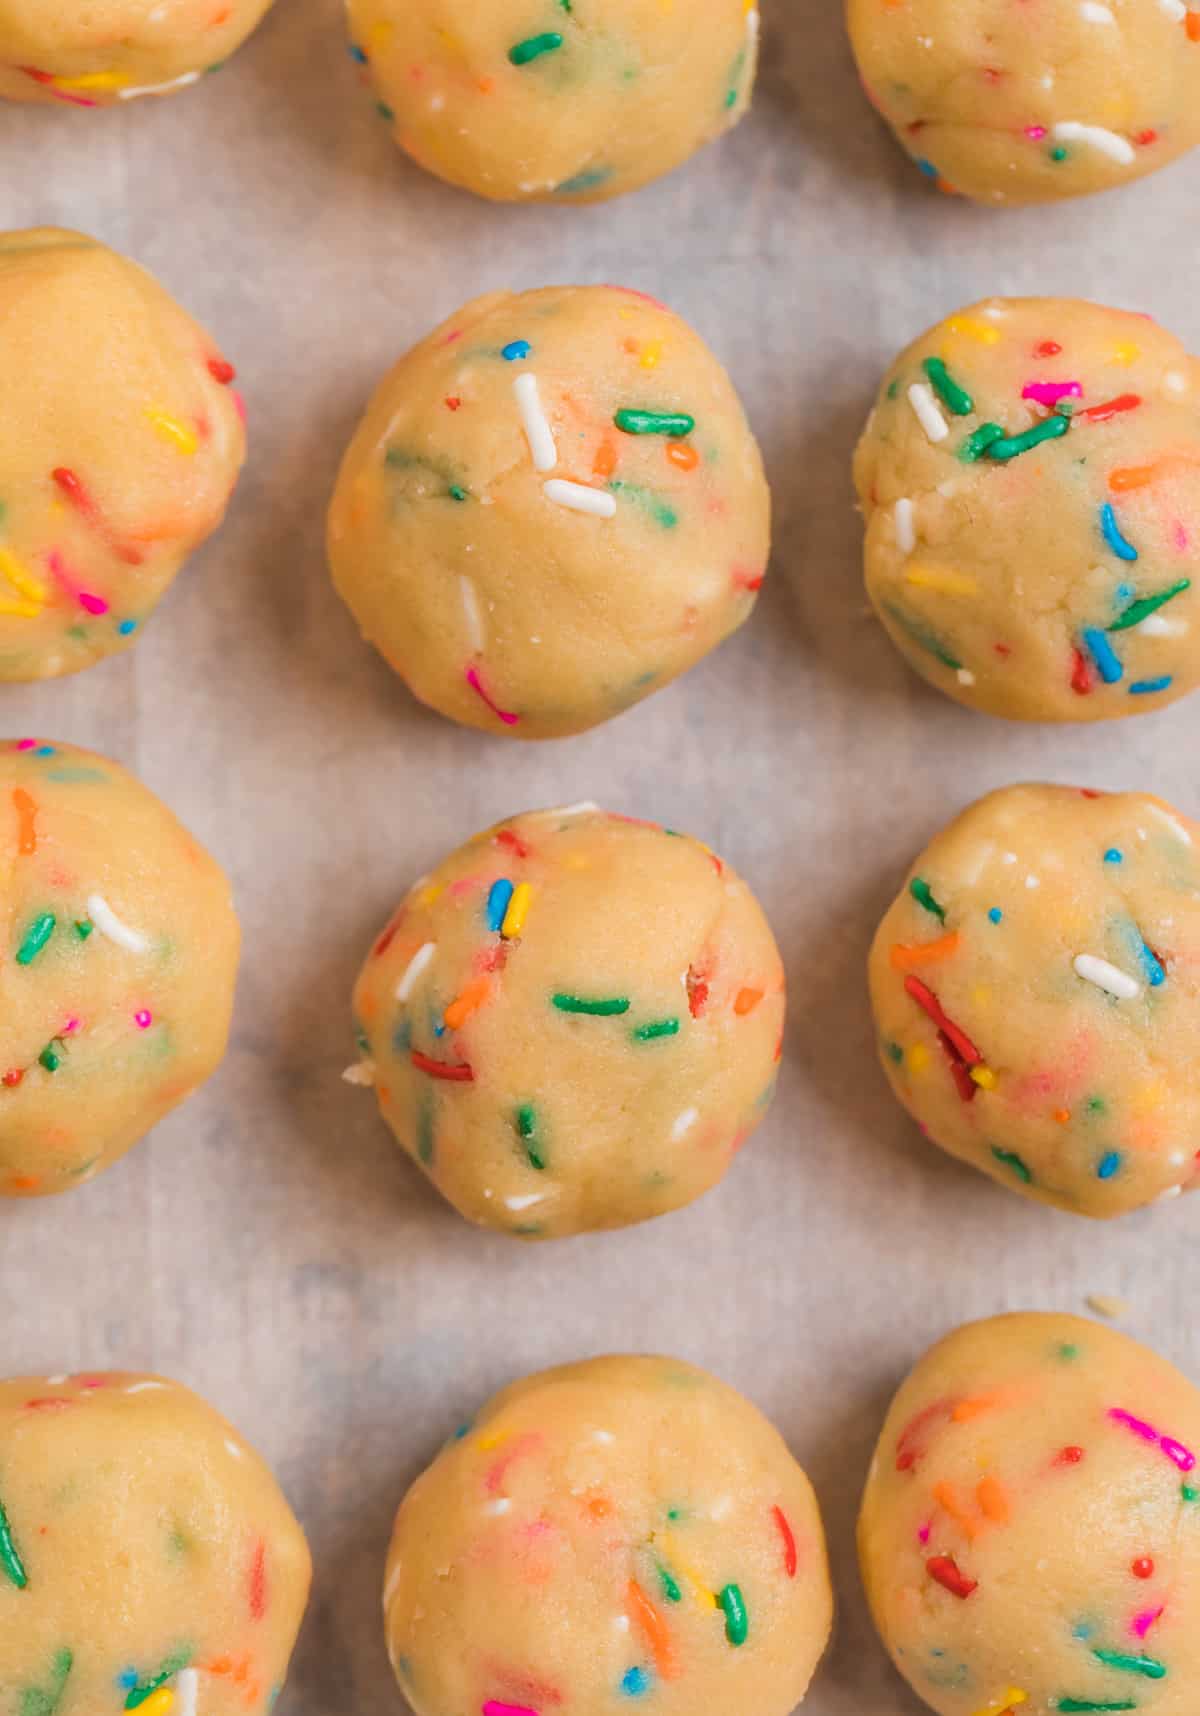 Rolled cookie dough balls with rainbow sprinkles on parchment lined baking sheet.